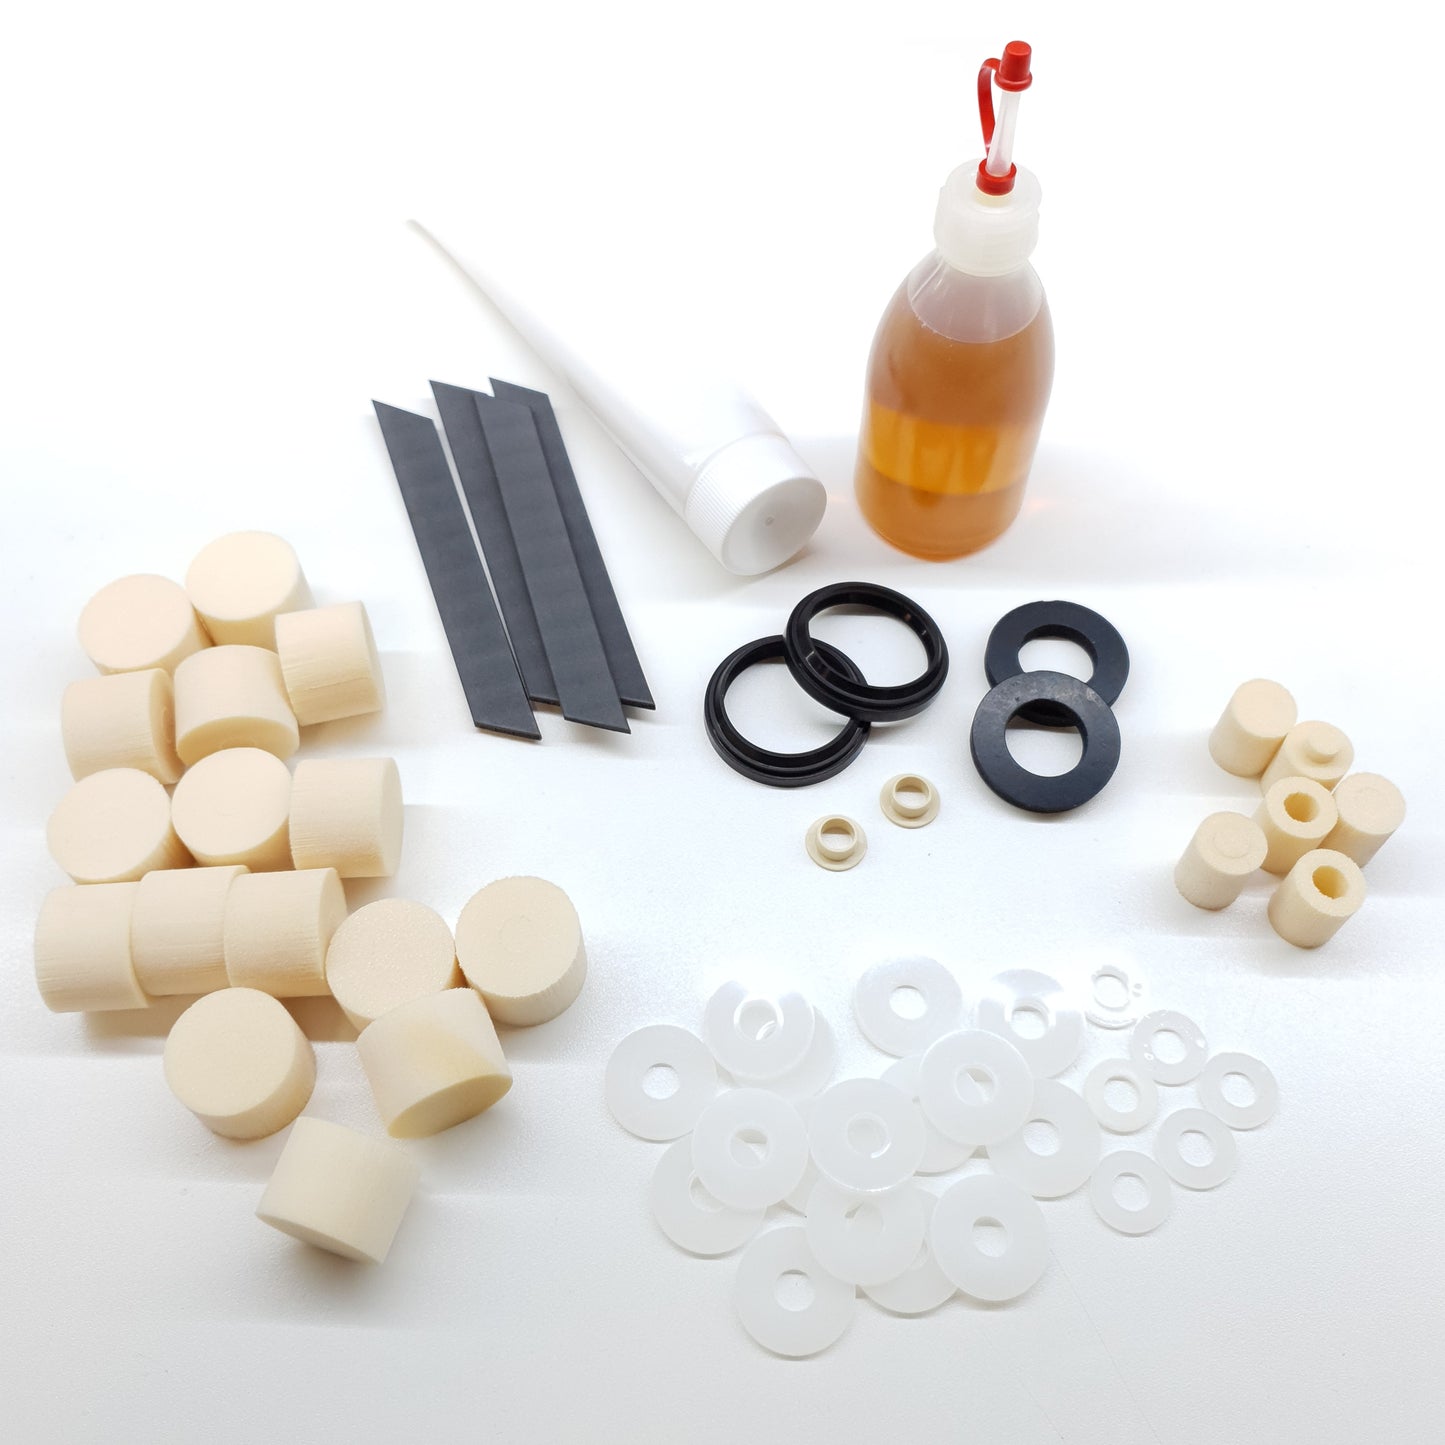 Complete service kit with elastomers for Votec Classic suspension forks GS4 Classic